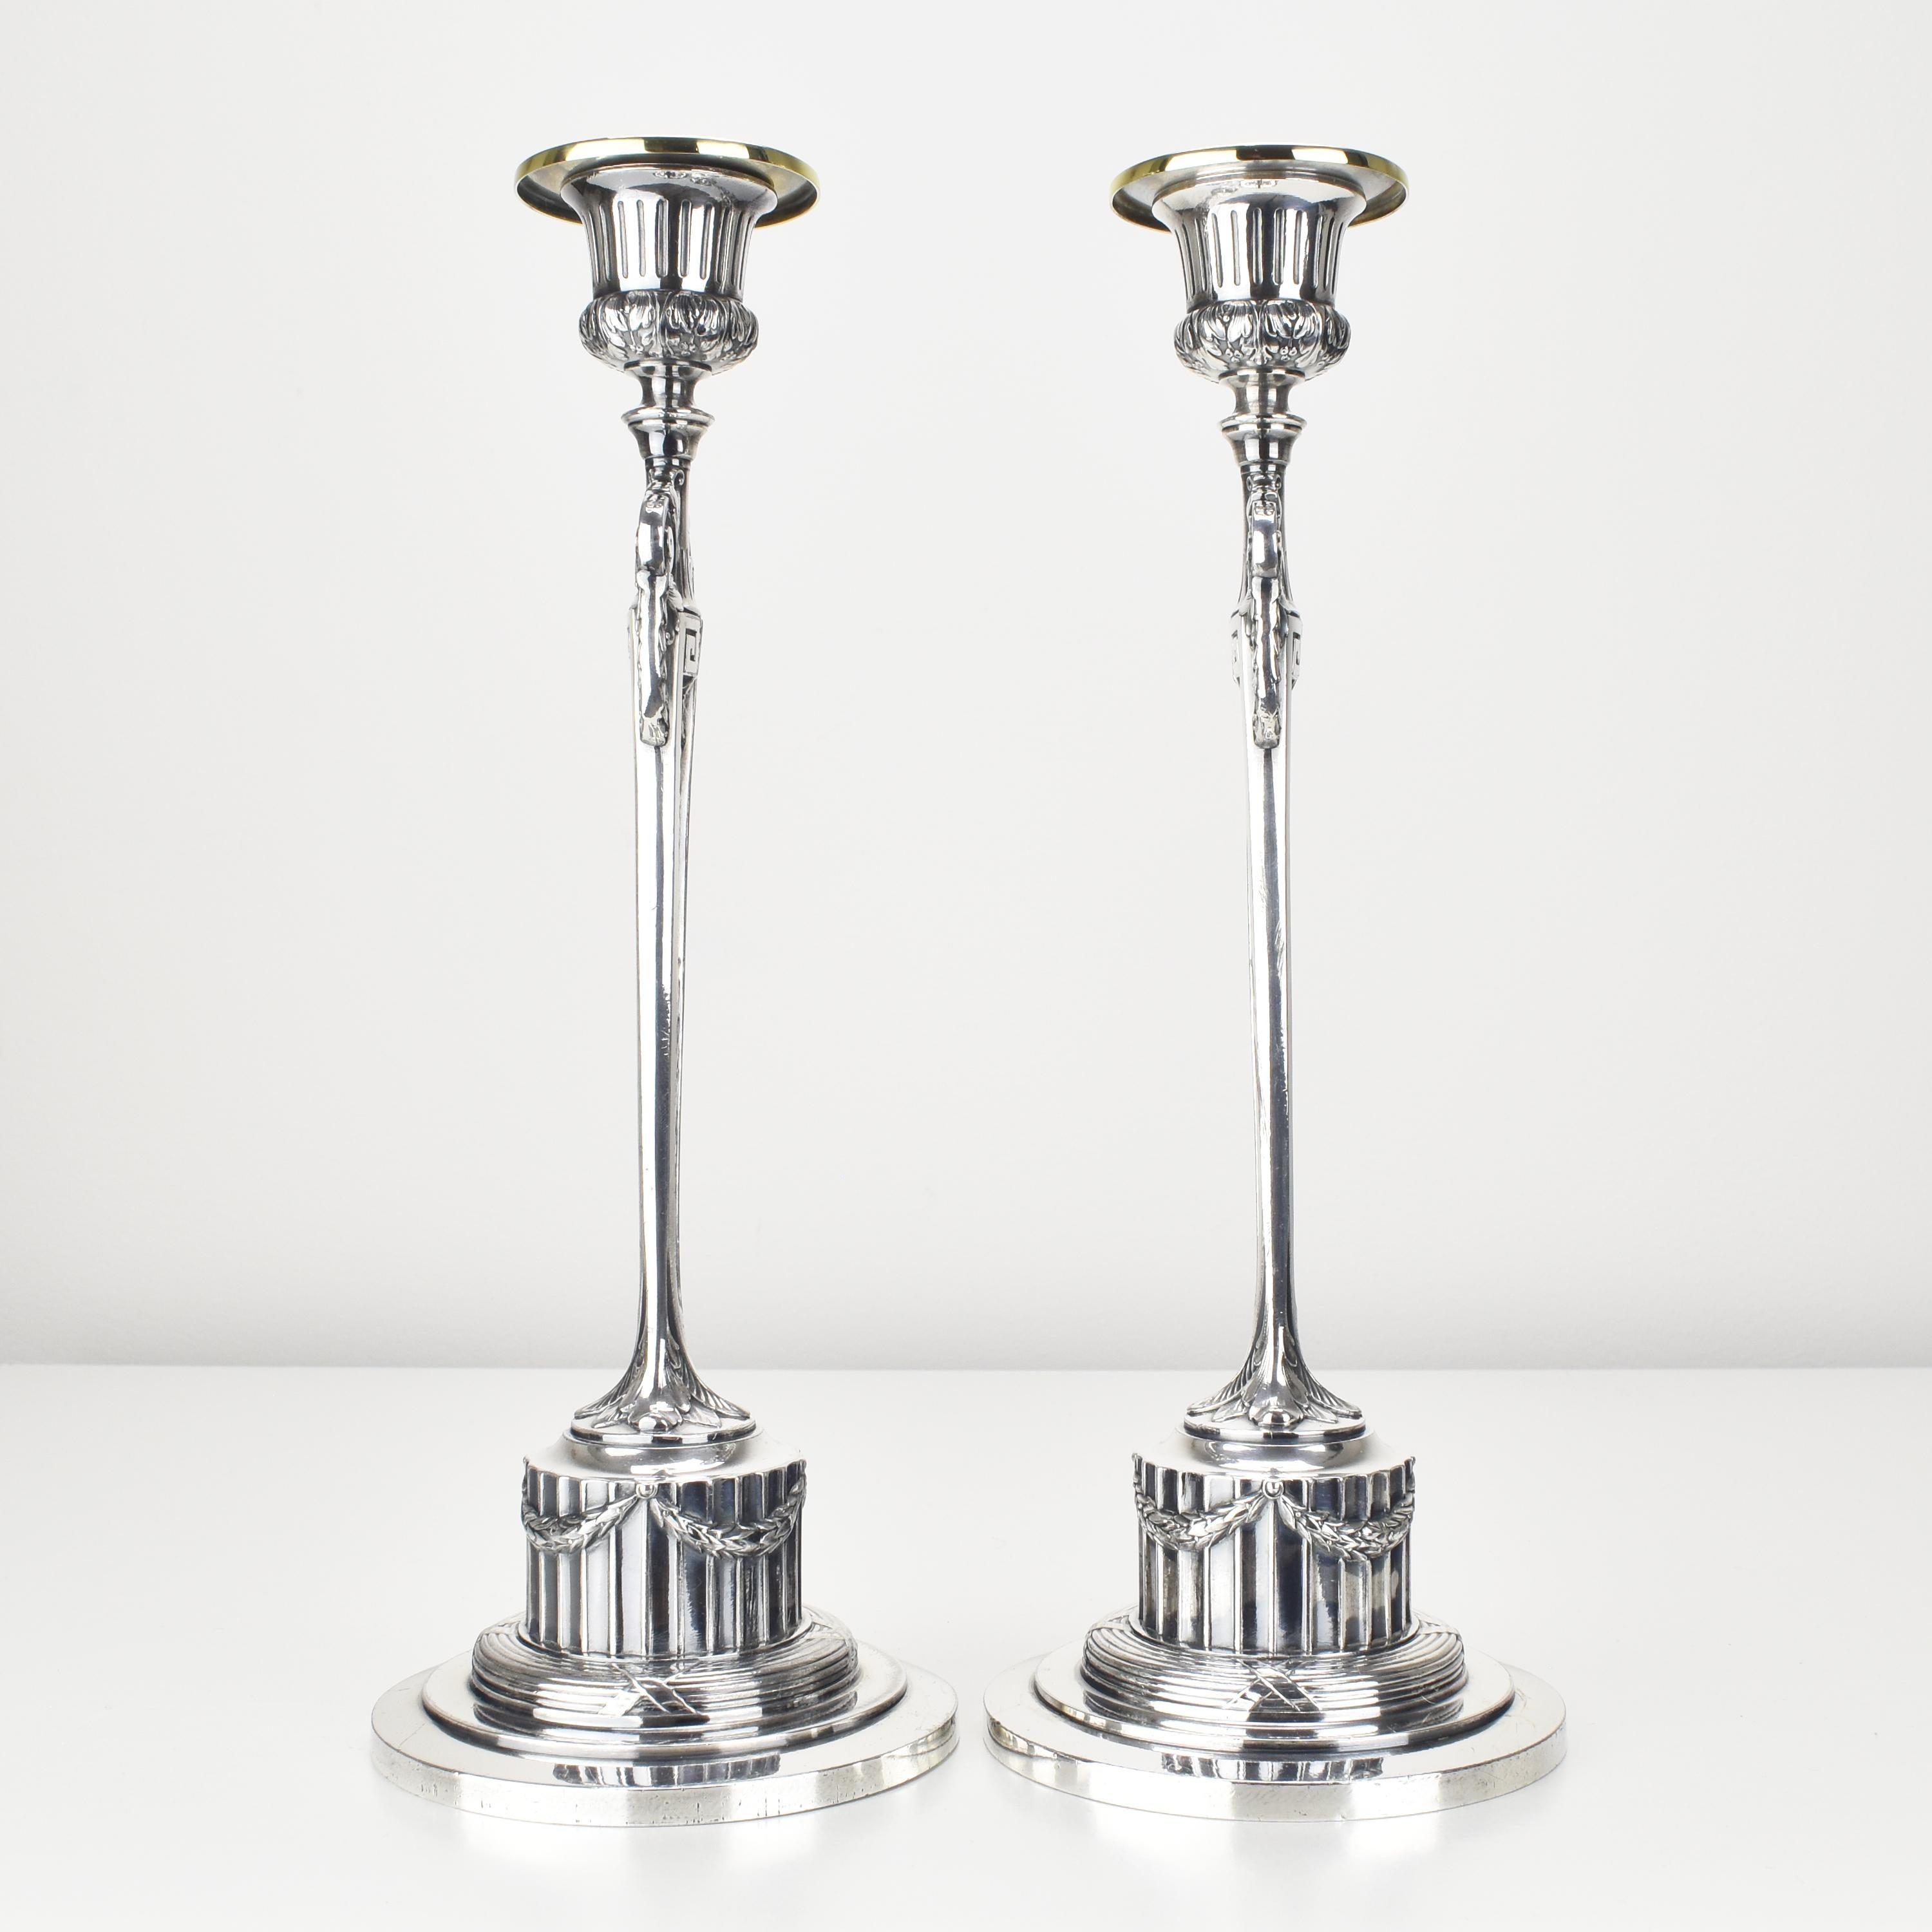 Antique Candlesticks Empire Pattern by WMF Art Nouveau Silverplated In Good Condition For Sale In Bad Säckingen, DE